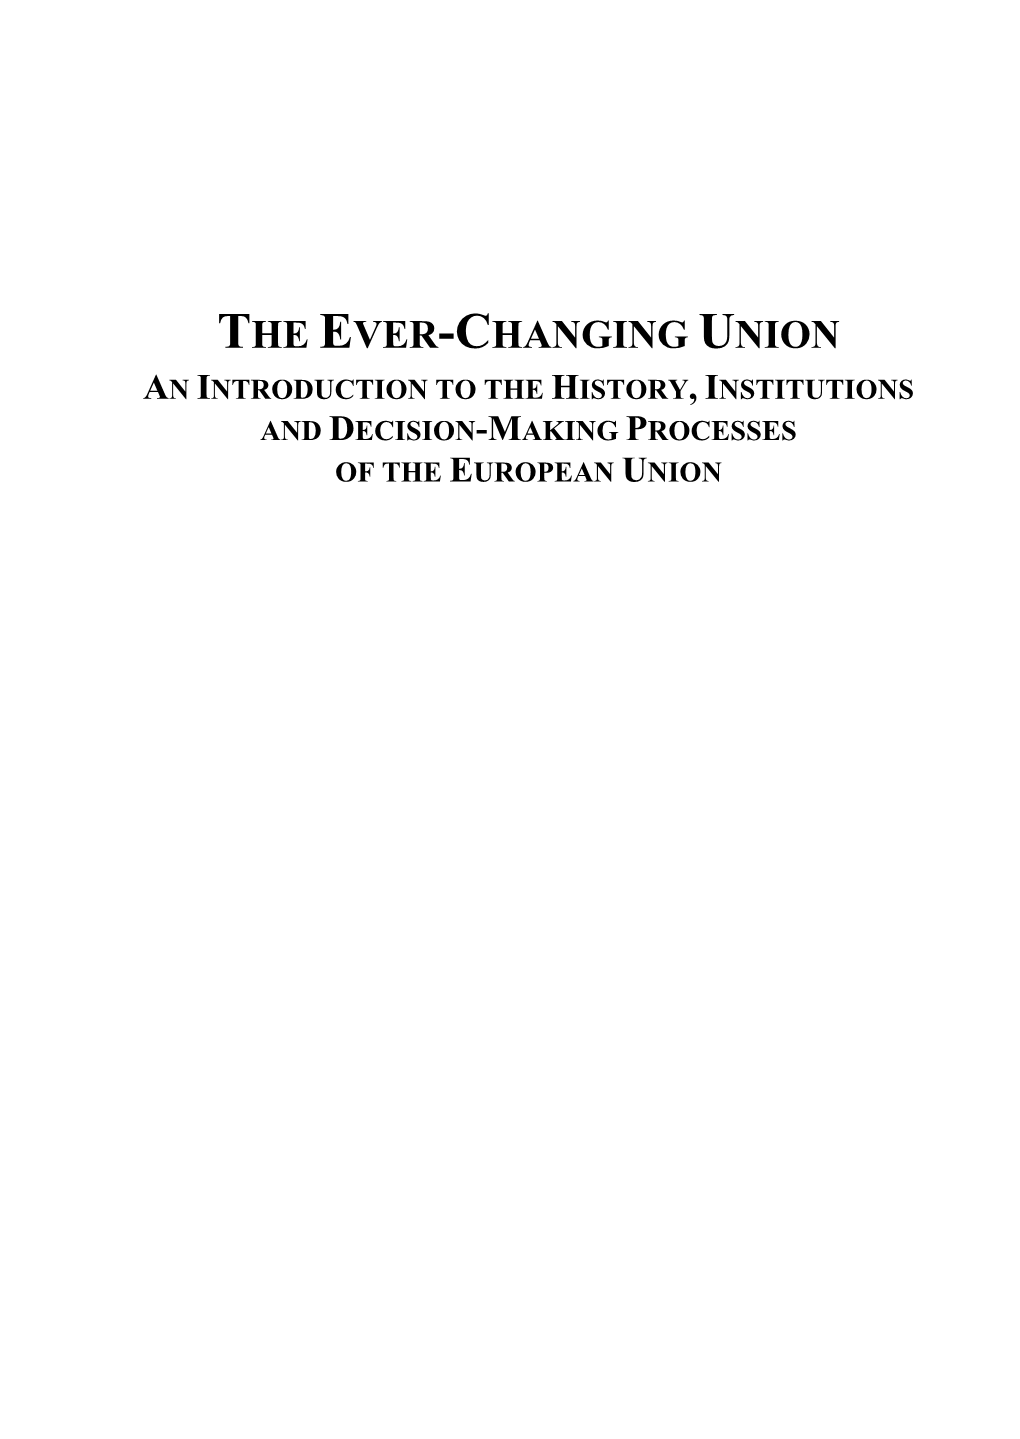 The Ever-Changing Union an Introduction to the History, Institutions and Decision-Making Processes of the European Union